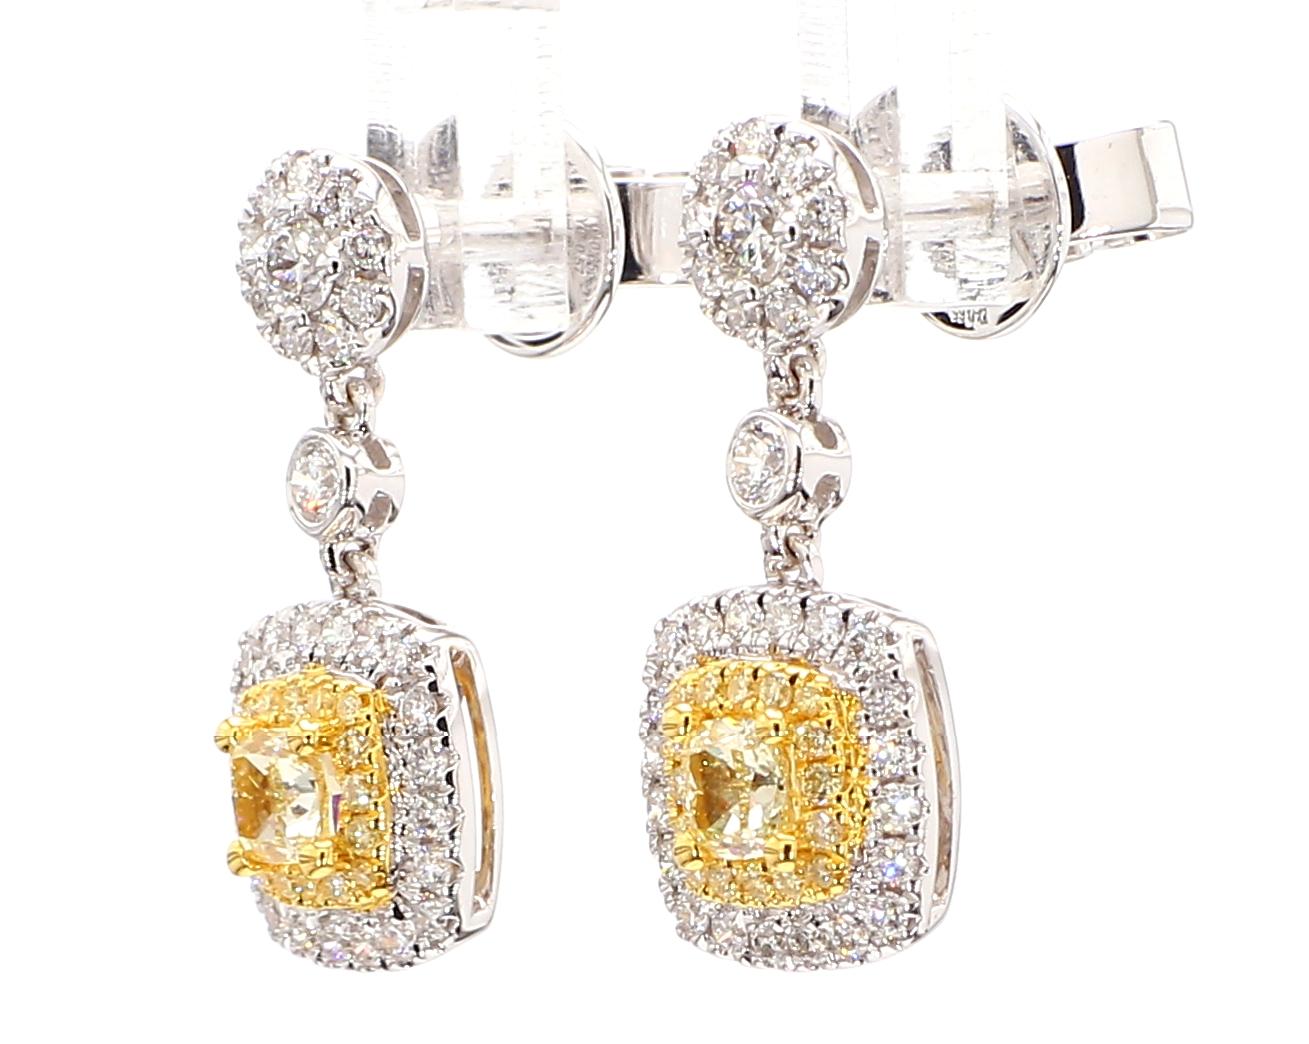 Earrings,
0.57 Ct Yellow Cushion (2 pc) 3.5 x 3.5mm center
0.65 Ct White Round Dia (62 pc)
0.14 Ct Yellow Round Dia (32 pc)

18K White Gold, 5.03 Gr

Crafted by MDJ Jewels Inc.